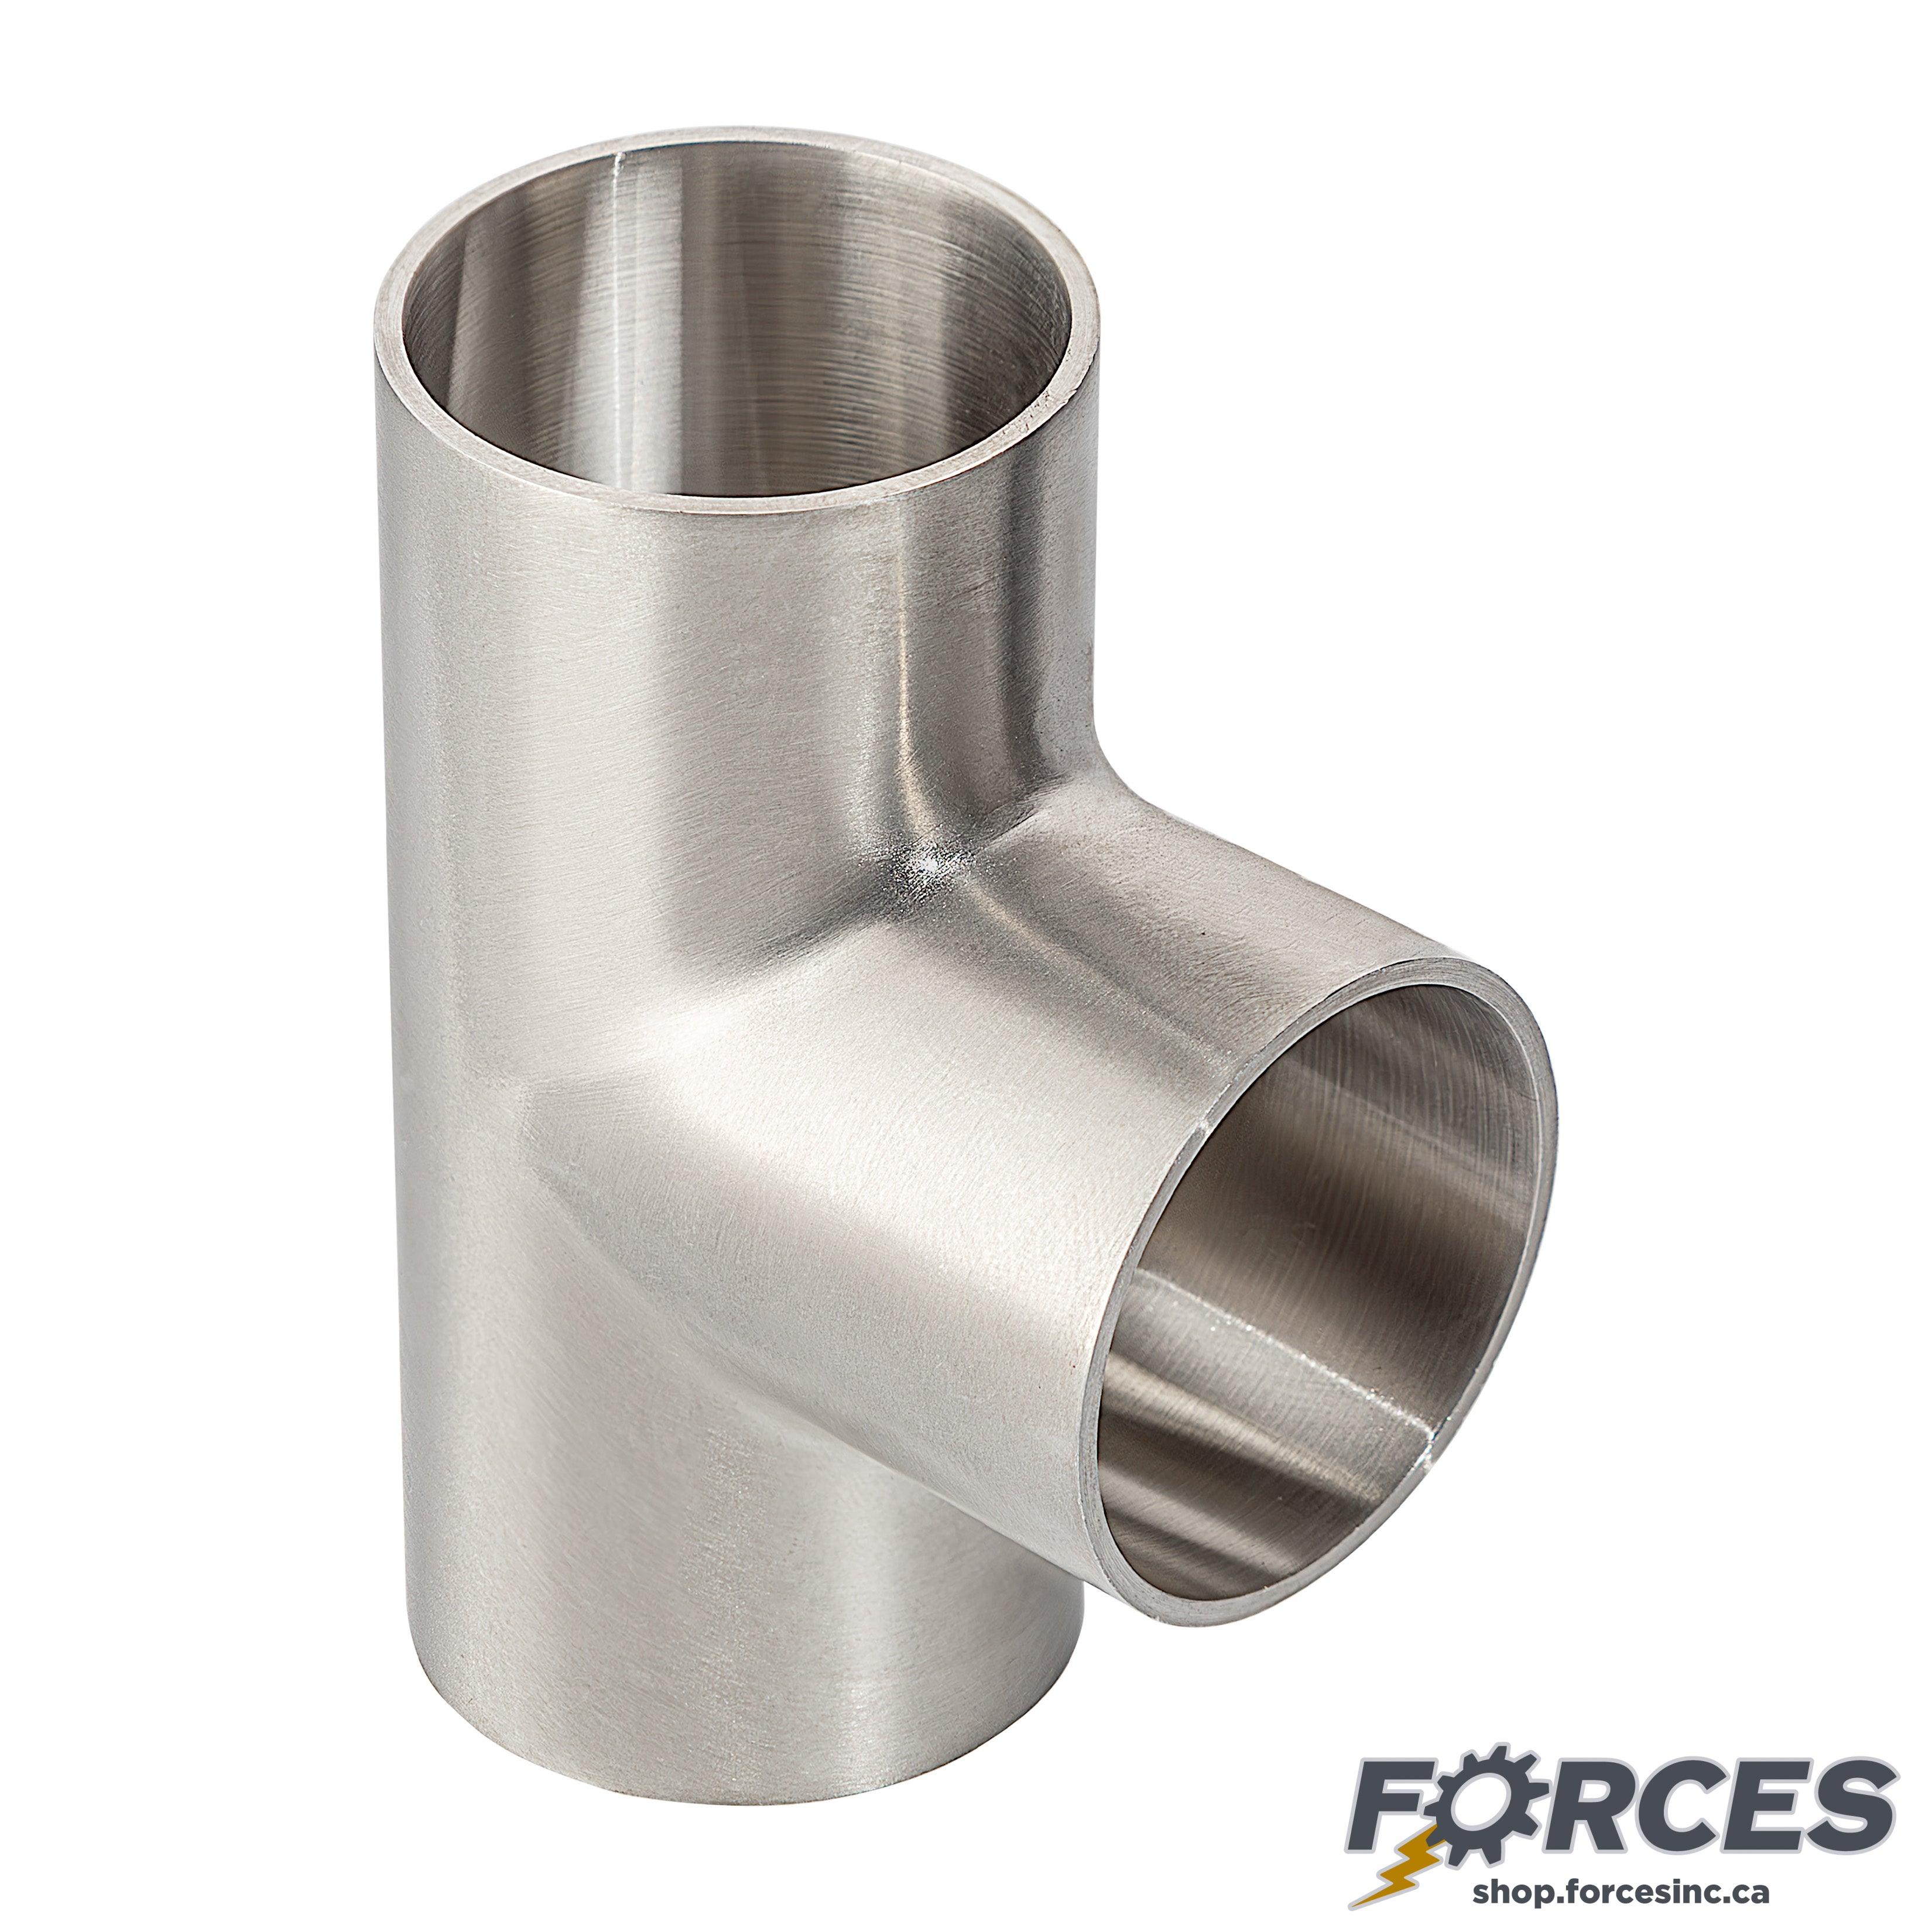 2" Butt Weld Short Tee - Stainless Steel 304 - Forces Inc